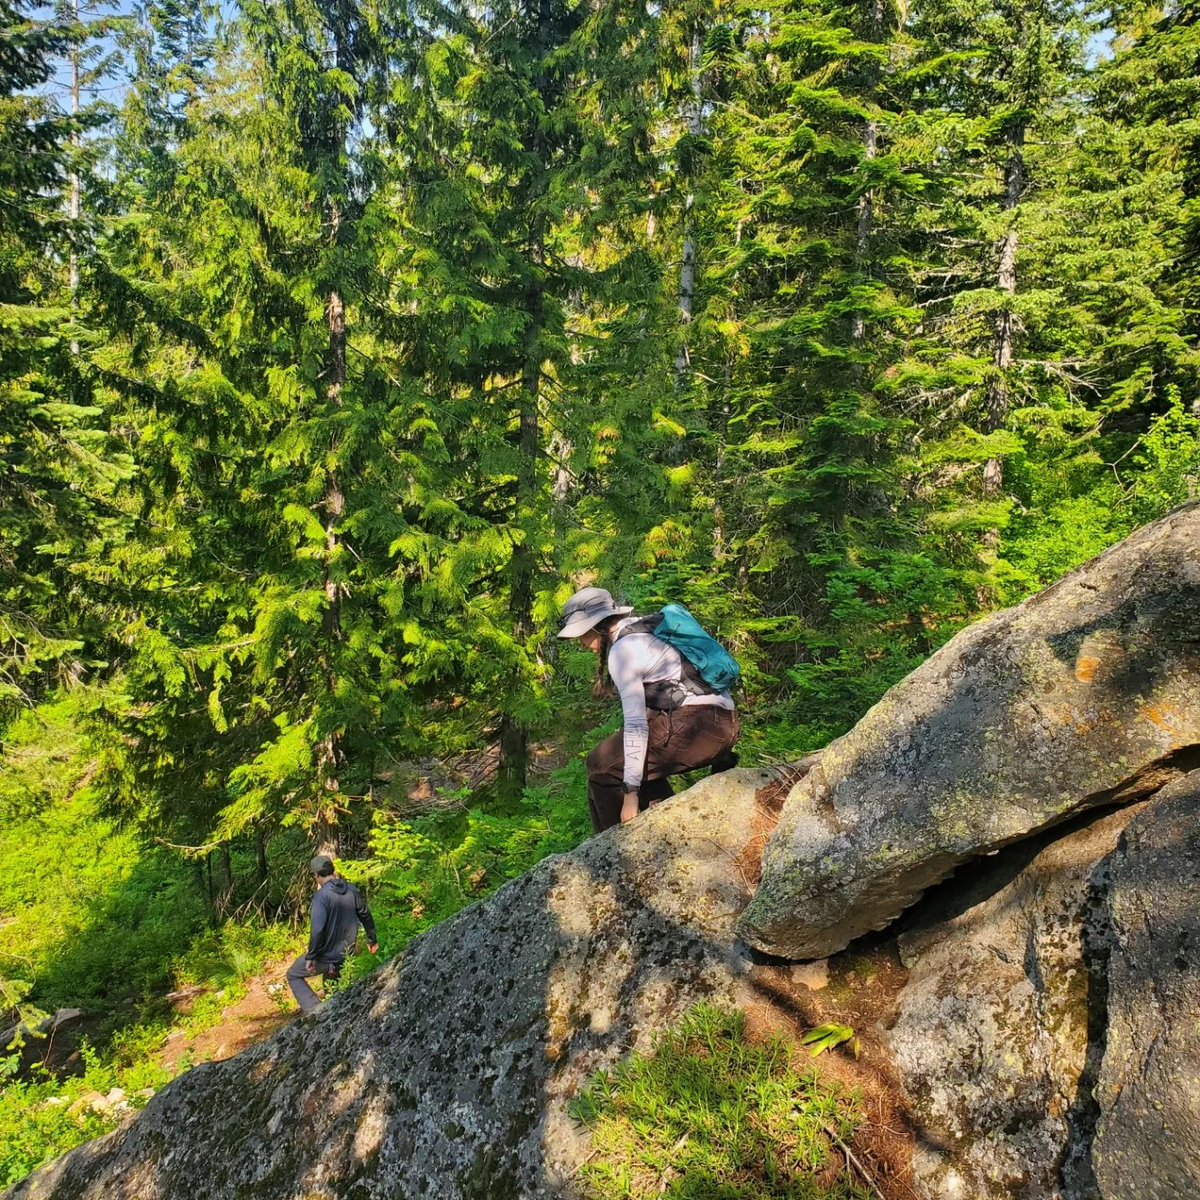 "IMBA Trail Solutions Project Manager Leah Mancabelli scoping a slab during trail design"